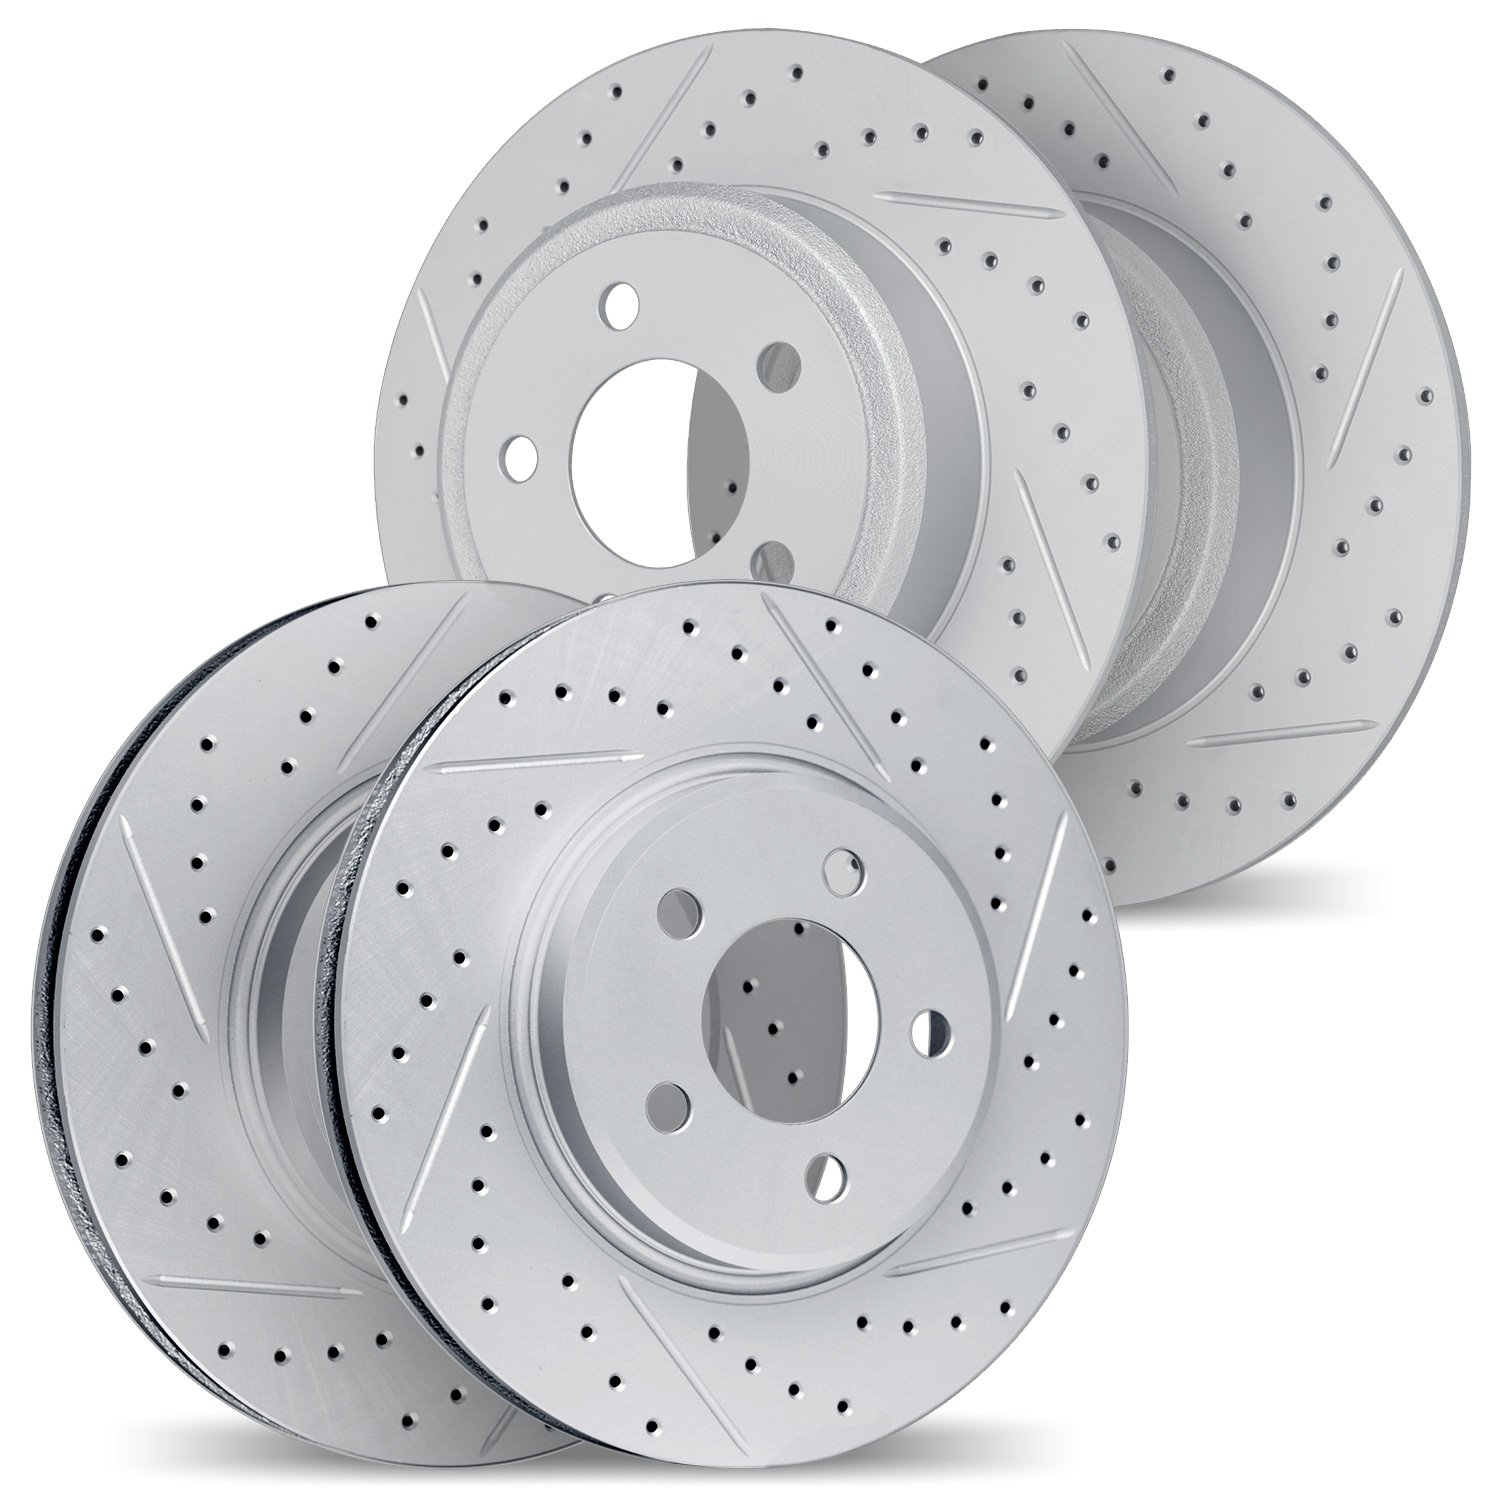 2004-74004 Geoperformance Drilled/Slotted Brake Rotors, Fits Select Multiple Makes/Models, Position: Front and Rear